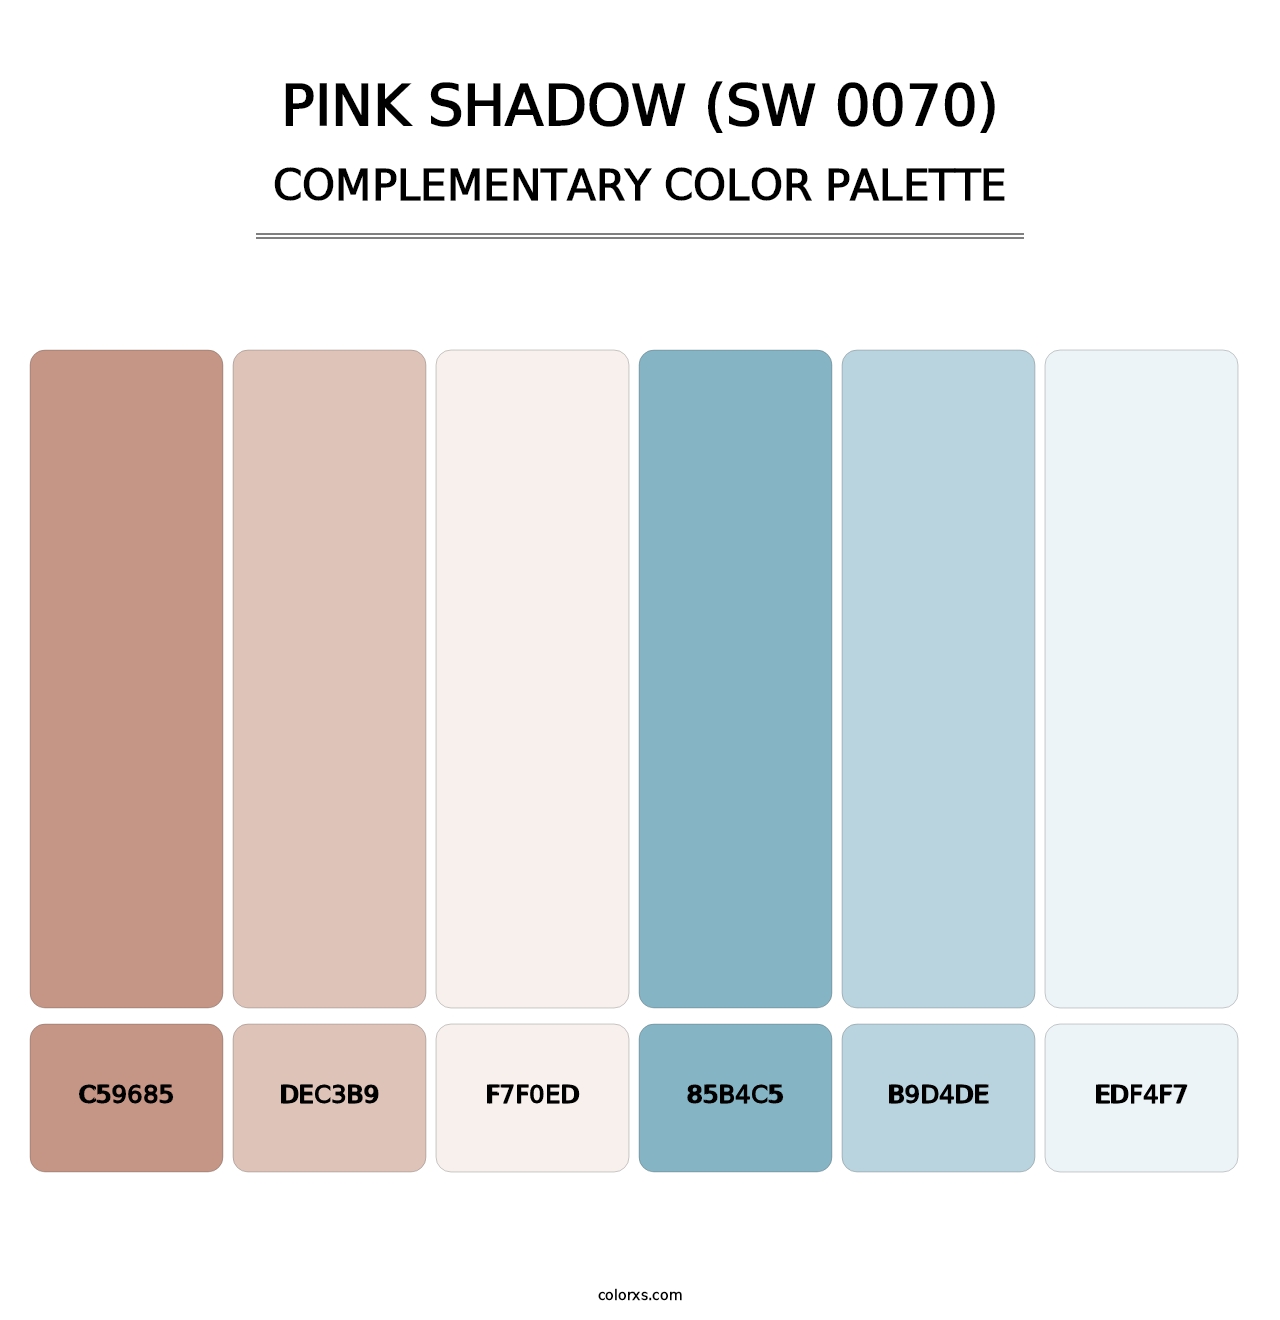 Pink Shadow (SW 0070) - Complementary Color Palette